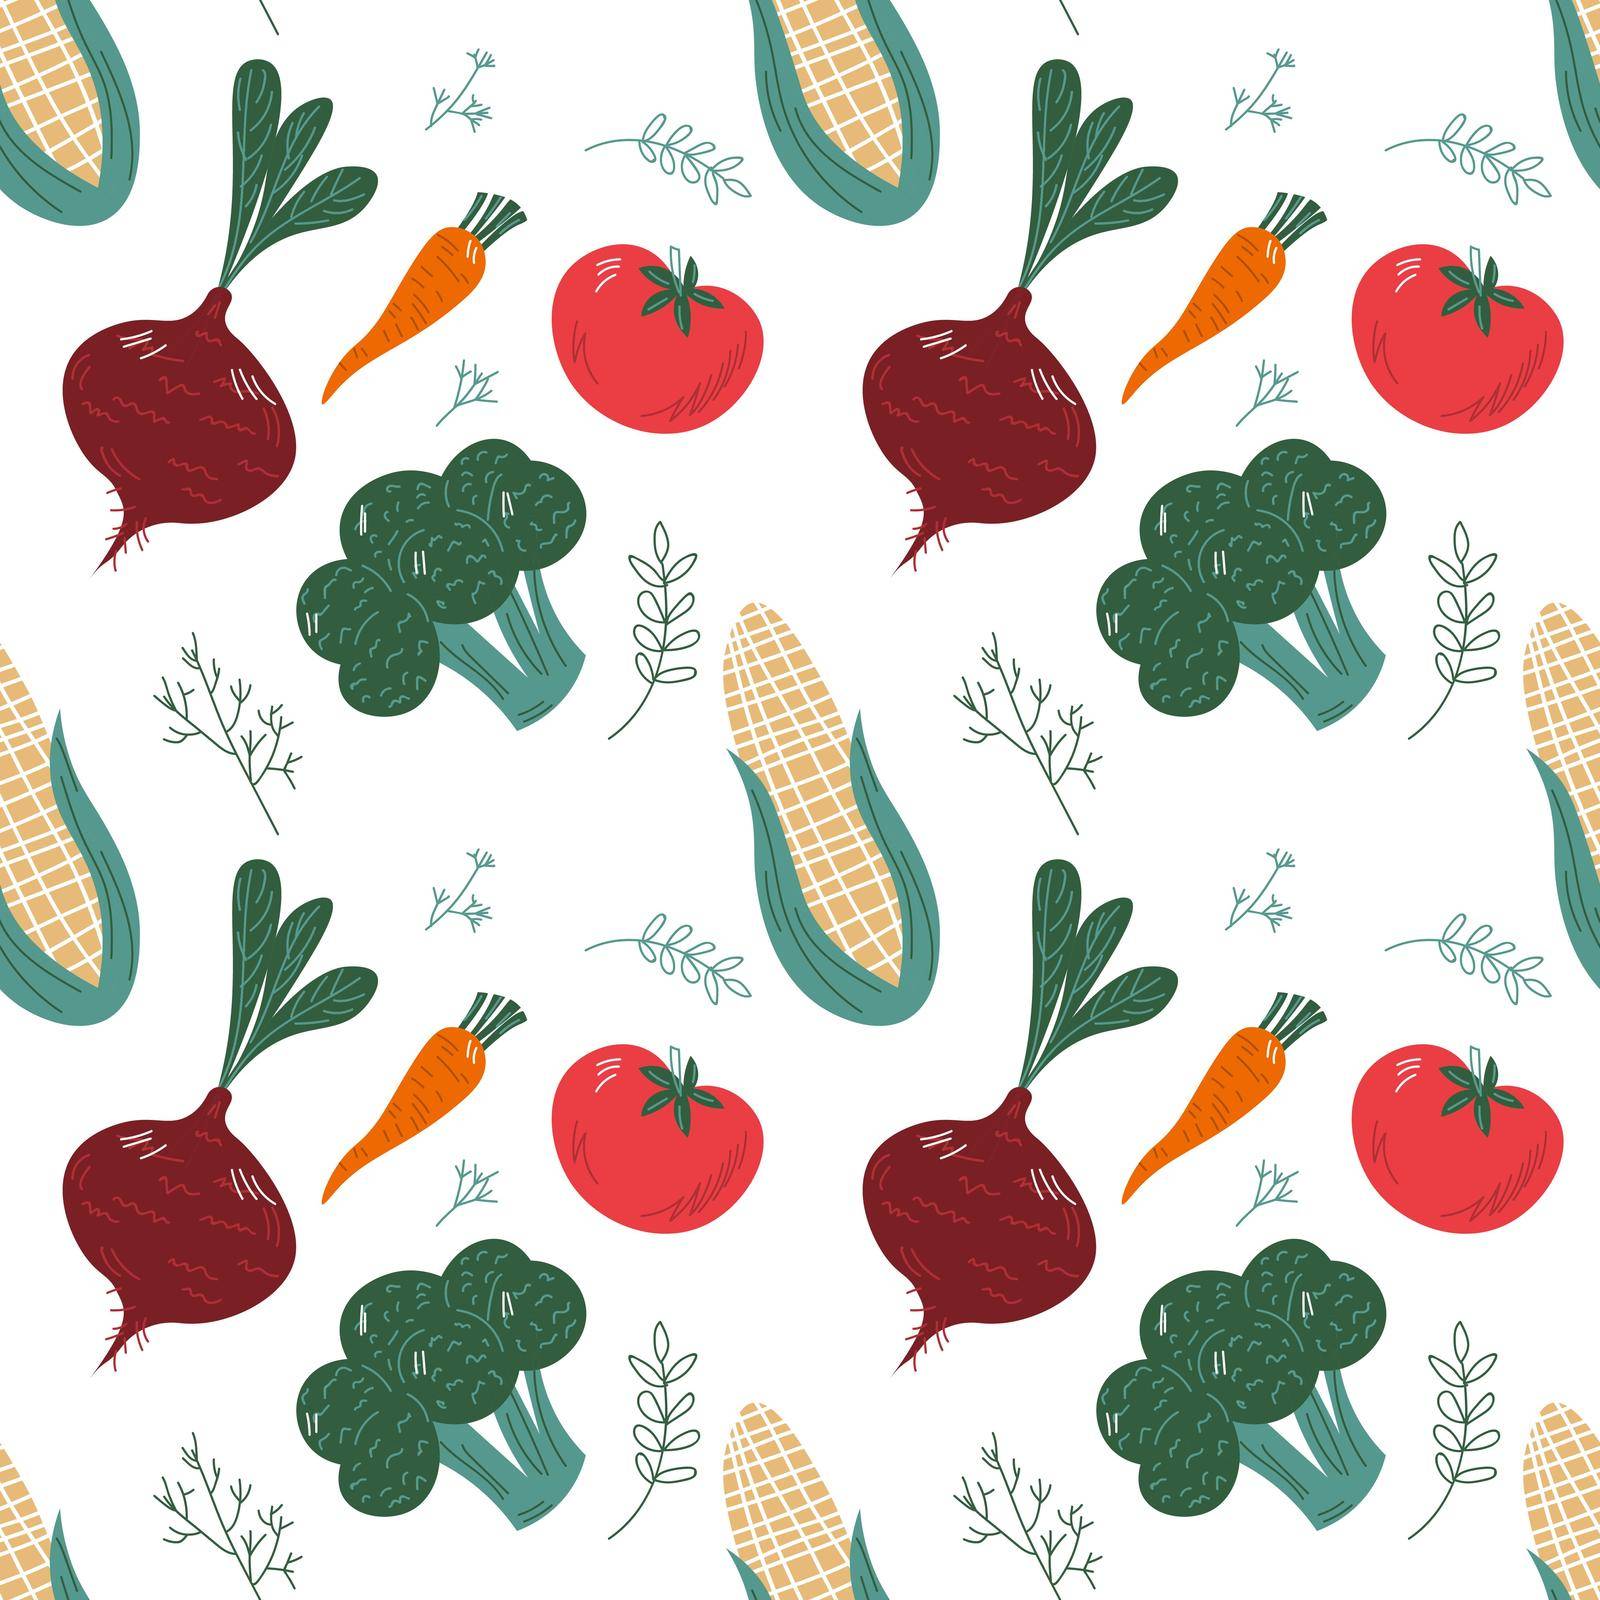 Seamless pattern with hand drawn colorful doodle vegetables. Sketch style vector set. Vegetables flat icons set carrot, tomato.